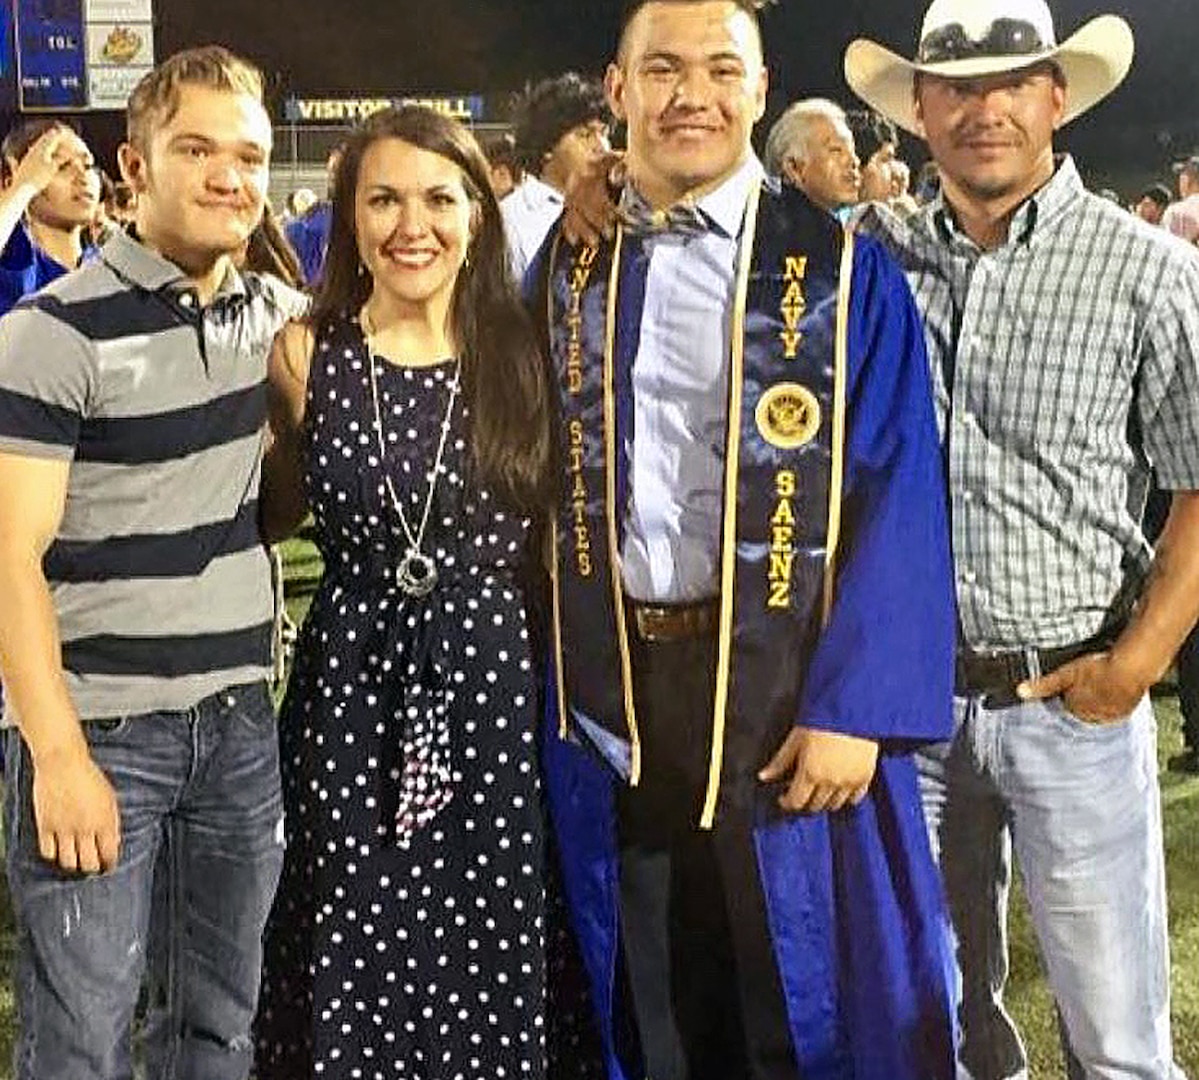 Bobbi Saenz (second from left) stands next to her son Diego Saenz (third from left) at his high school graduation in Kerrville in 2018. Family members joining them are Raul Vasquez (left) Bobbi Saenz’s son, and Jay Vasquez (right). Both Bobbi and Diego Saenz are currently serving in the Navy.